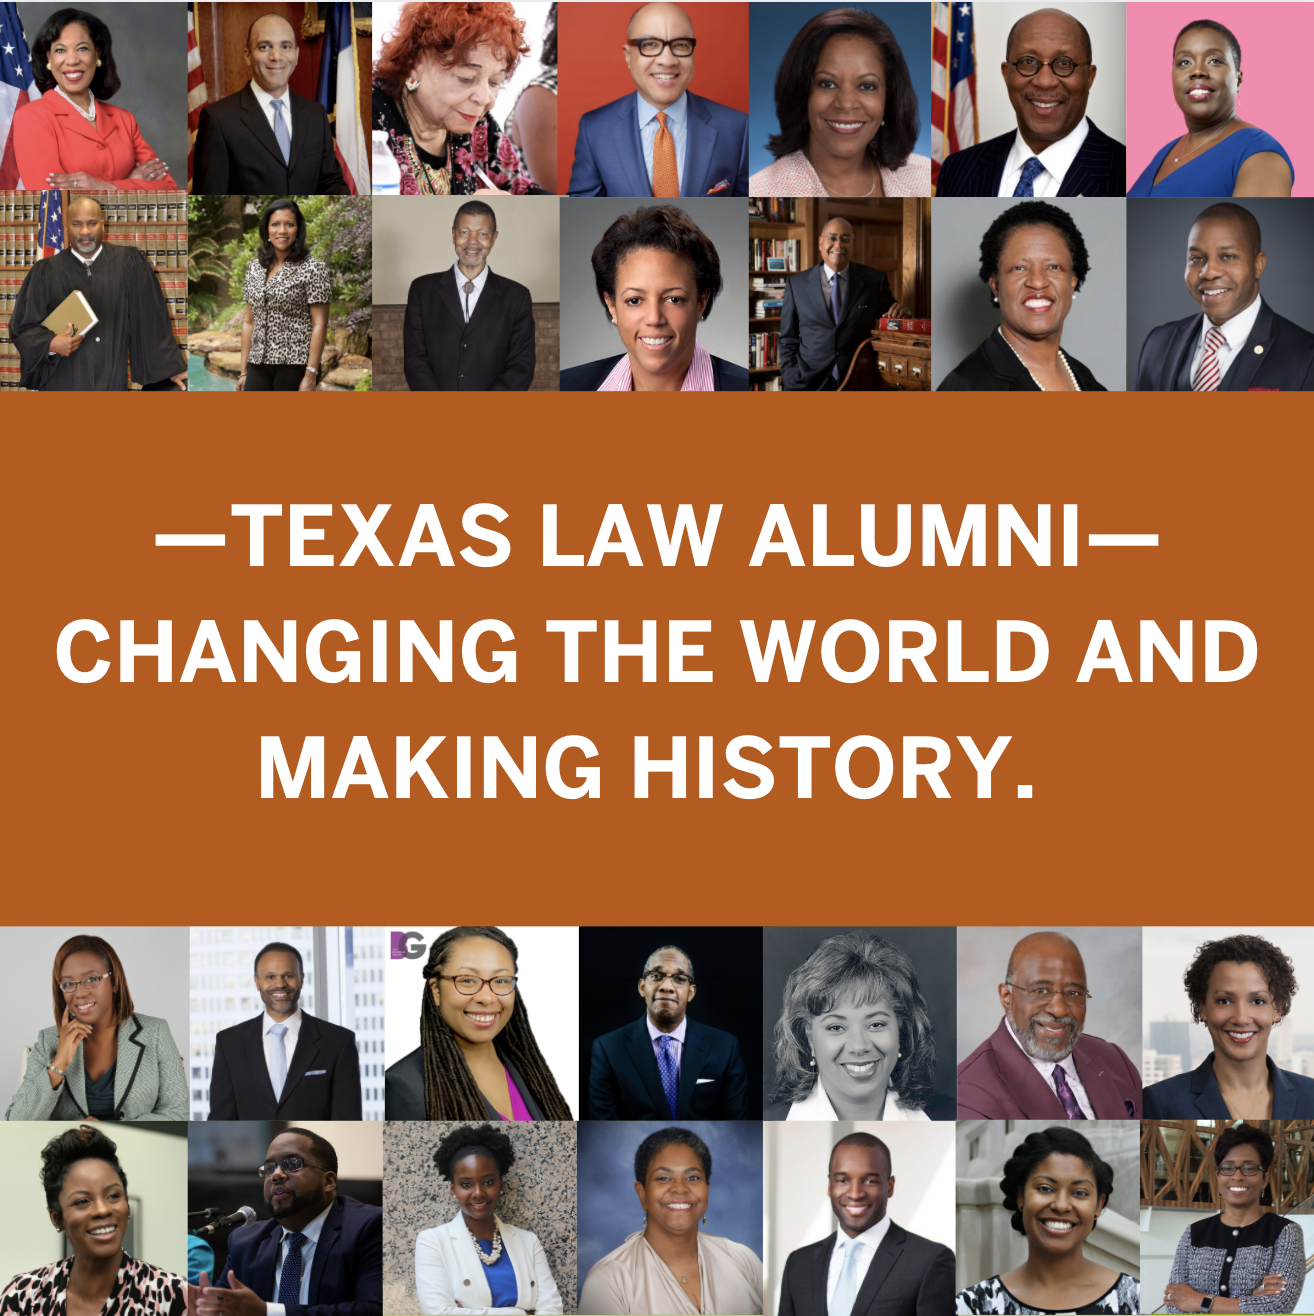 Headshots of 28 alumni and text that reads, "Texas Law Alumni - Changing the World and Making History"